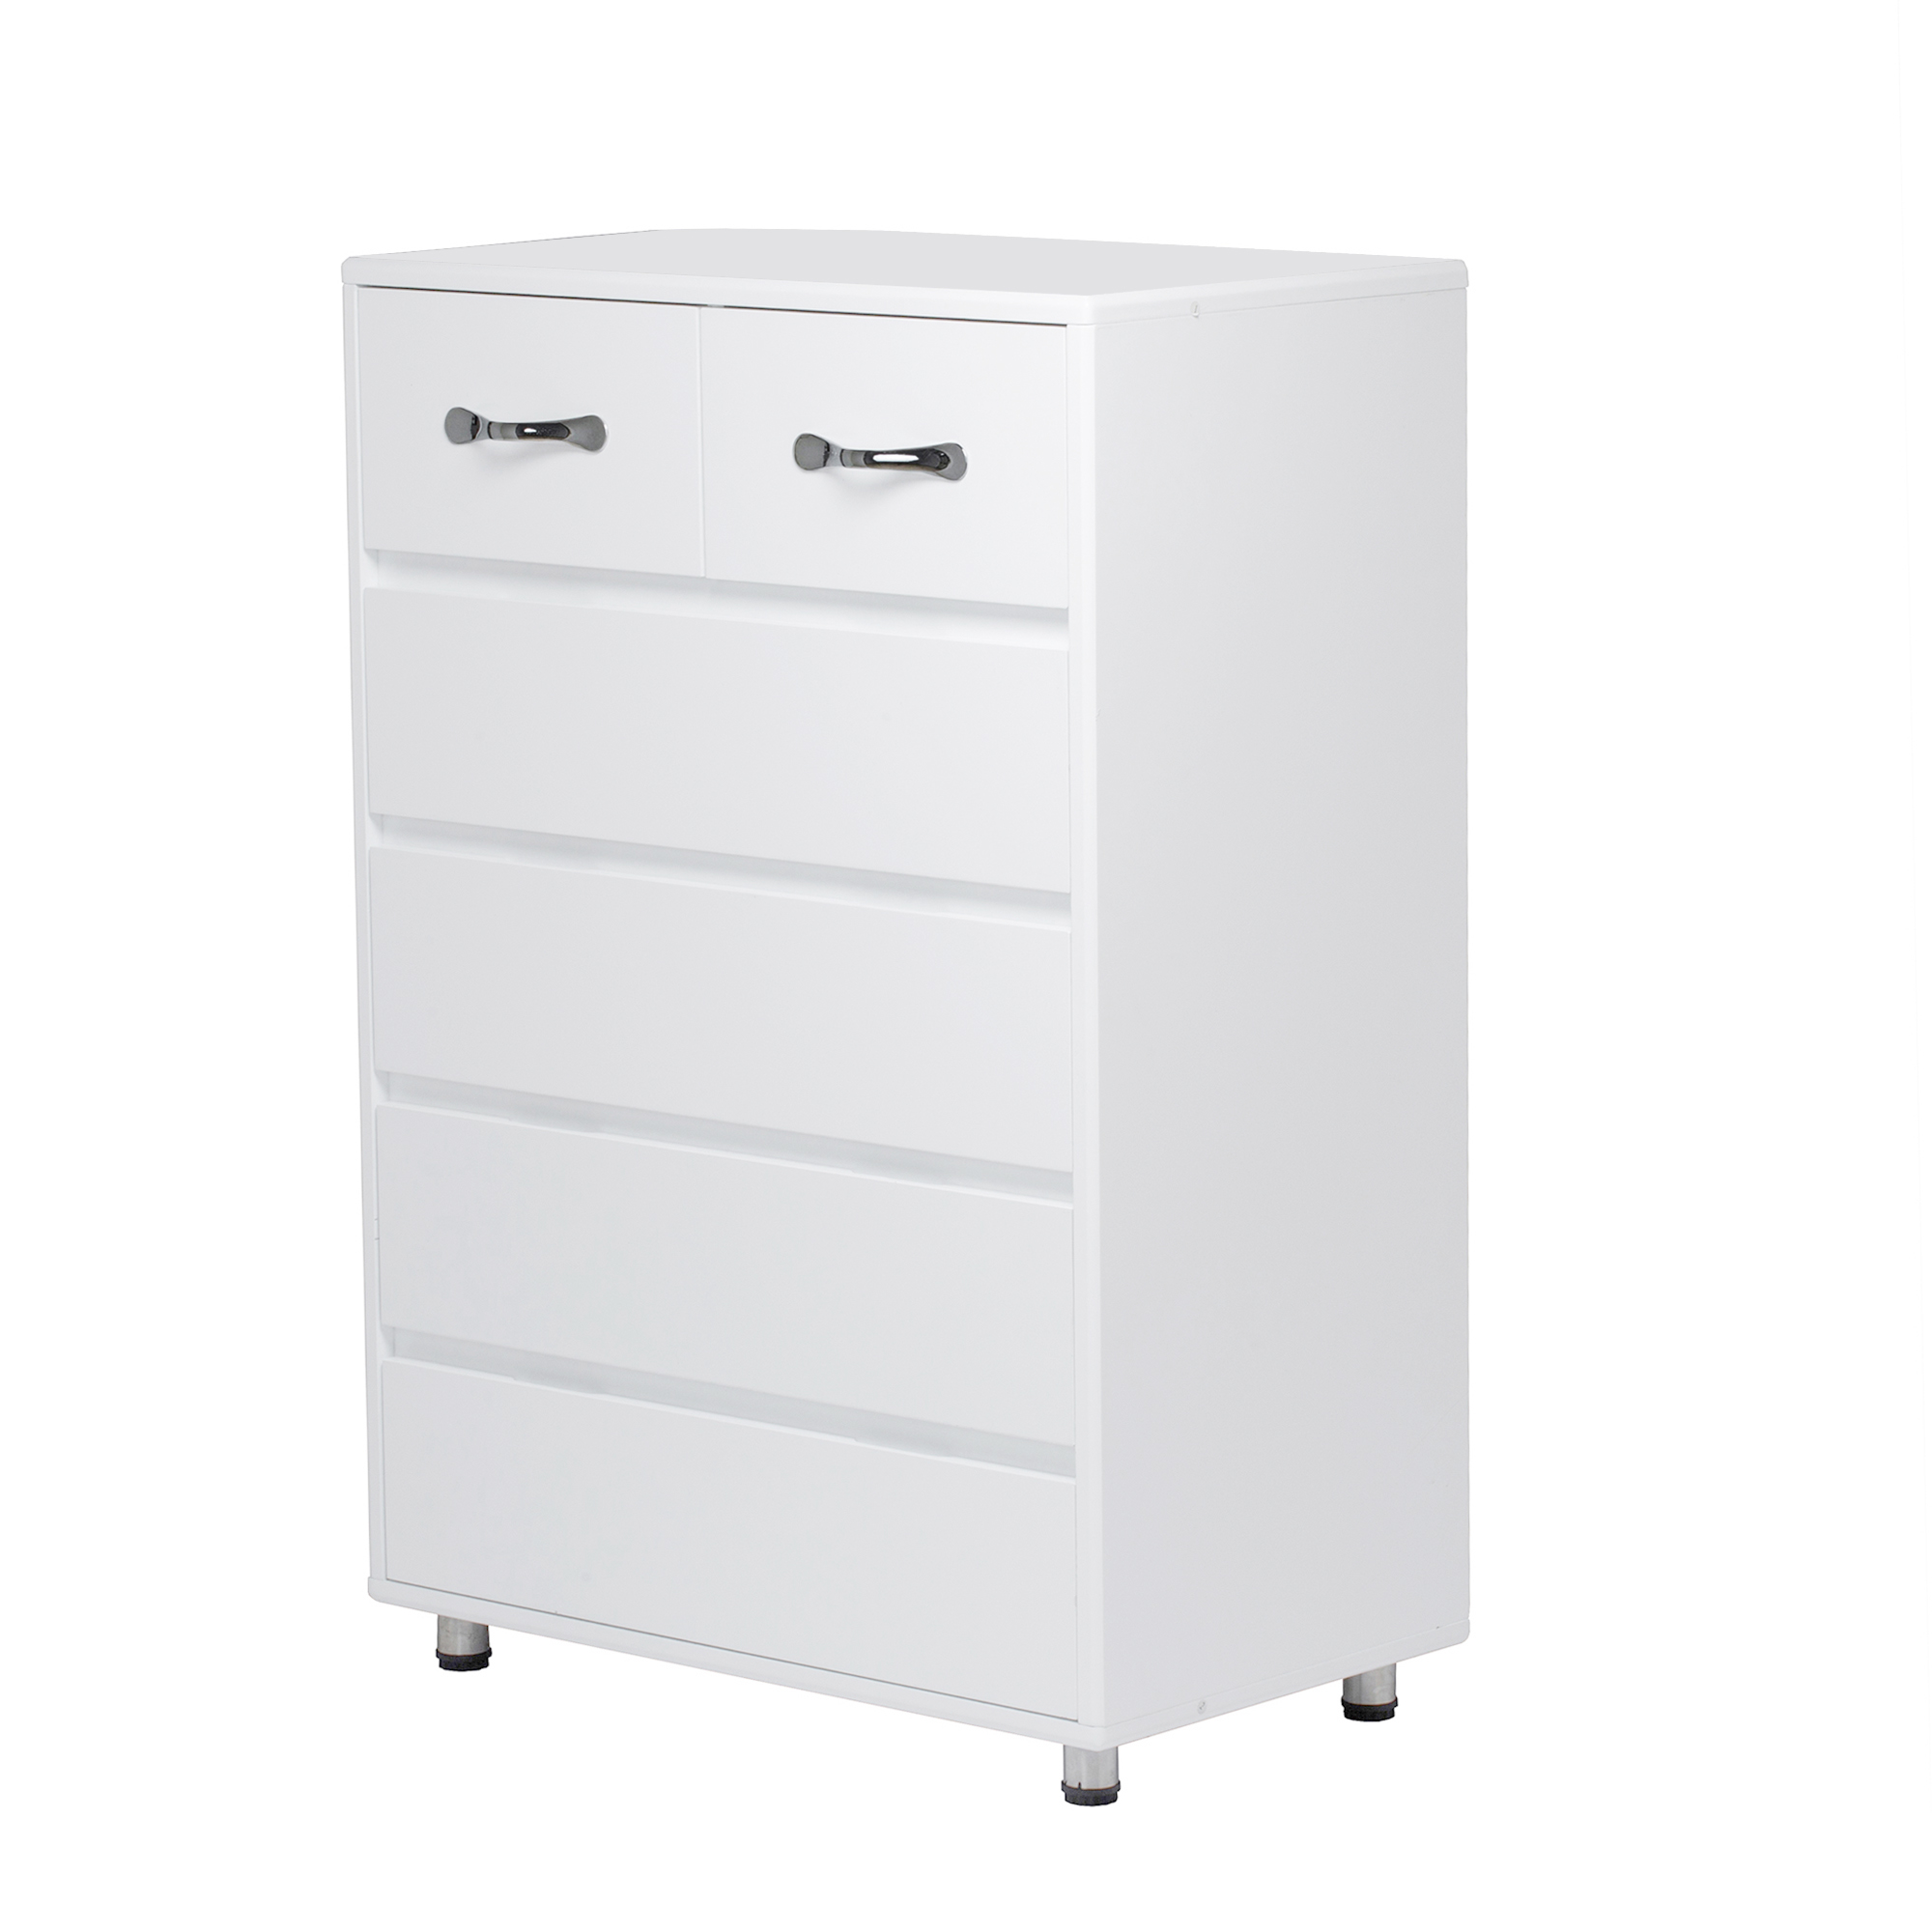 6 Drawer Dresser, URHOMEPRO Chest of Drawers Storage Organizer Nightstand, Wood Frame Drawer Chest with Steel Tube Legs, Bathroom Floor Cabinet, Living Room Office Bedroom Furniture, White, W12868 - image 5 of 10